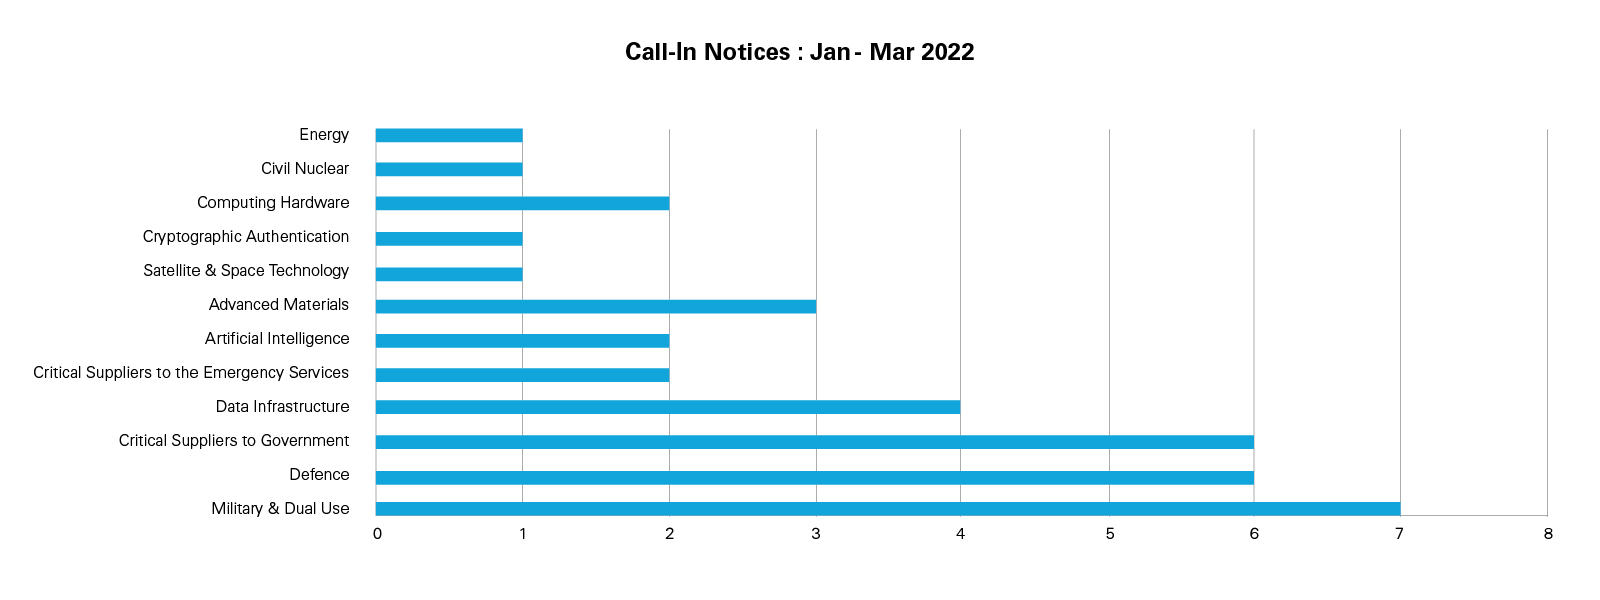 Call-In Notices: Jan - Mar 2022